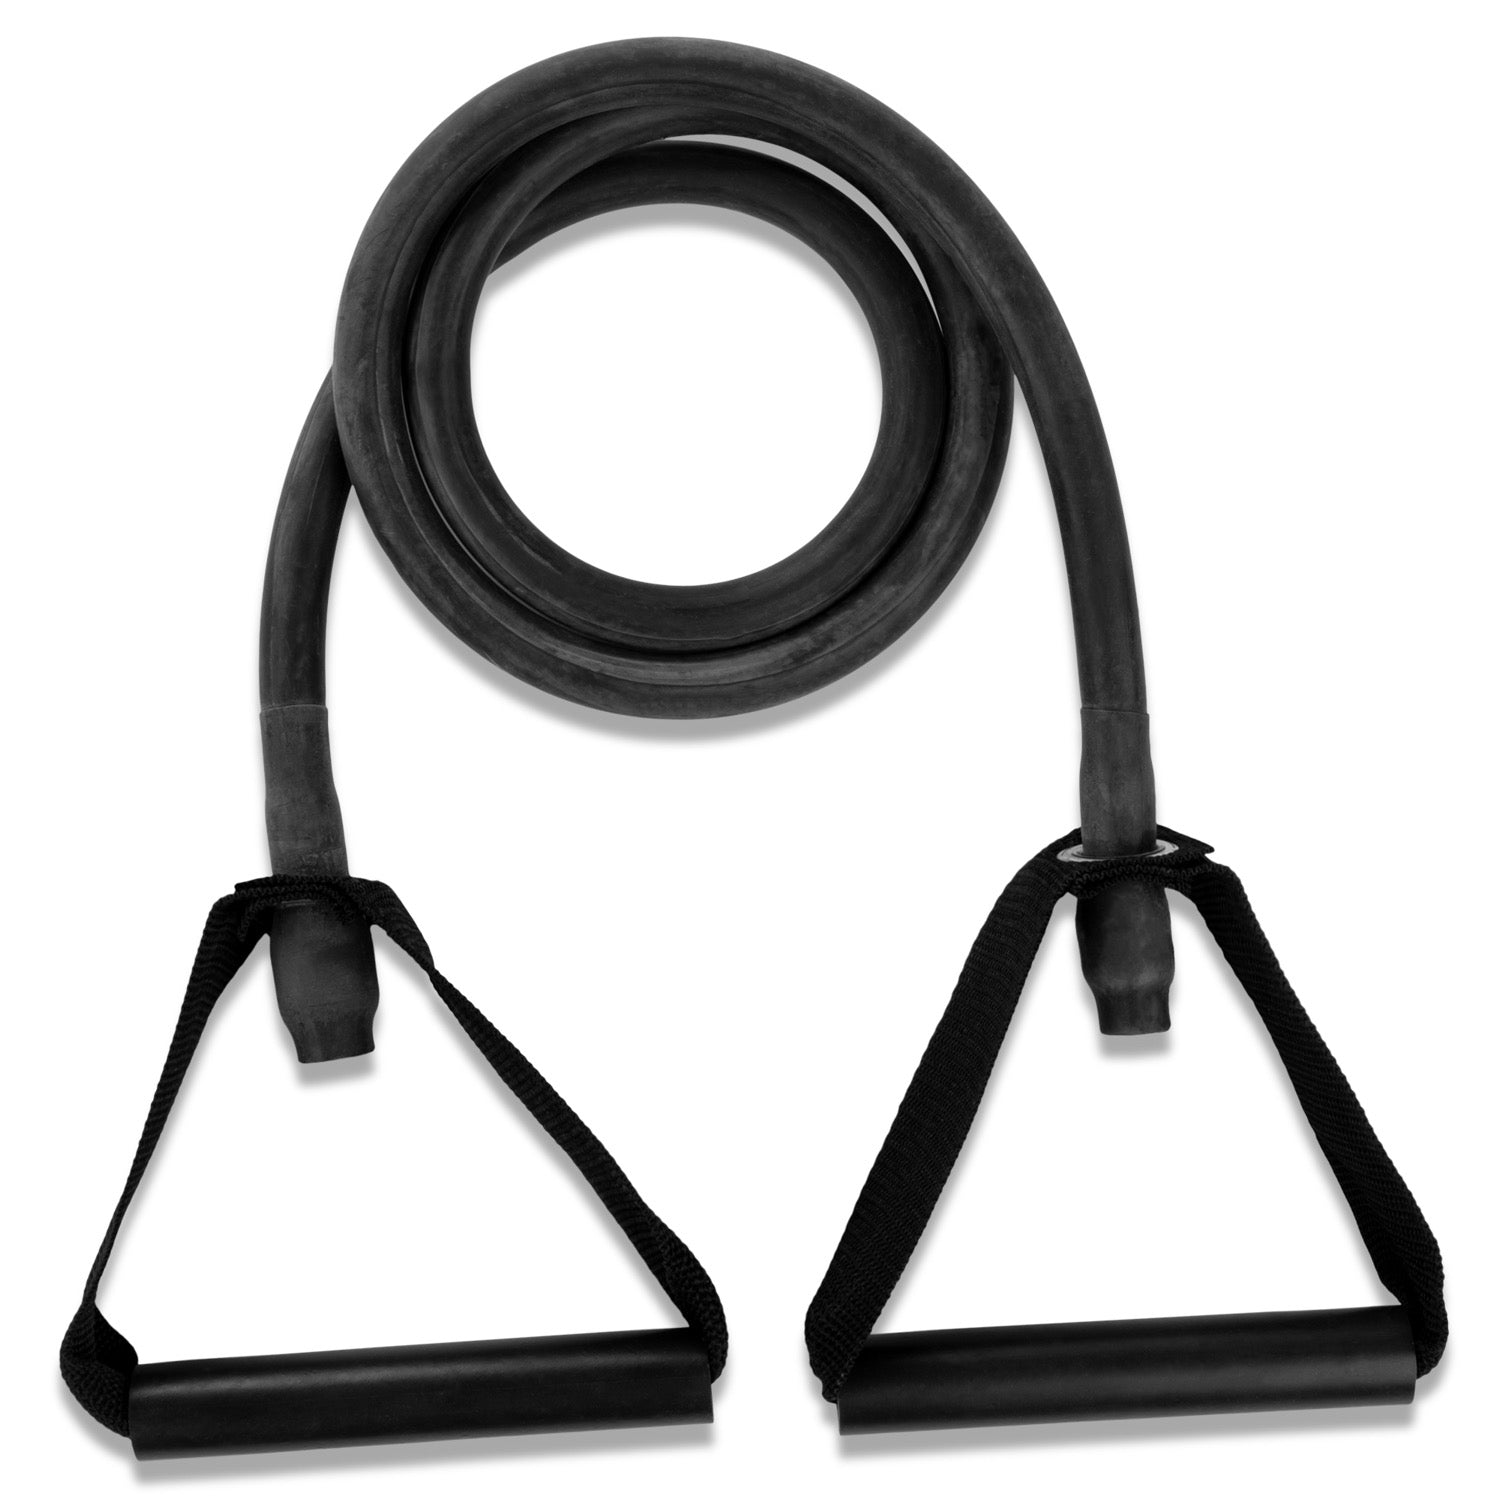 XP Resistance Tubing with PVC Handles Series Extra-Heavy / Black RHINO Fitness __label:NEW! fitness physical therapy resistance Training tubing